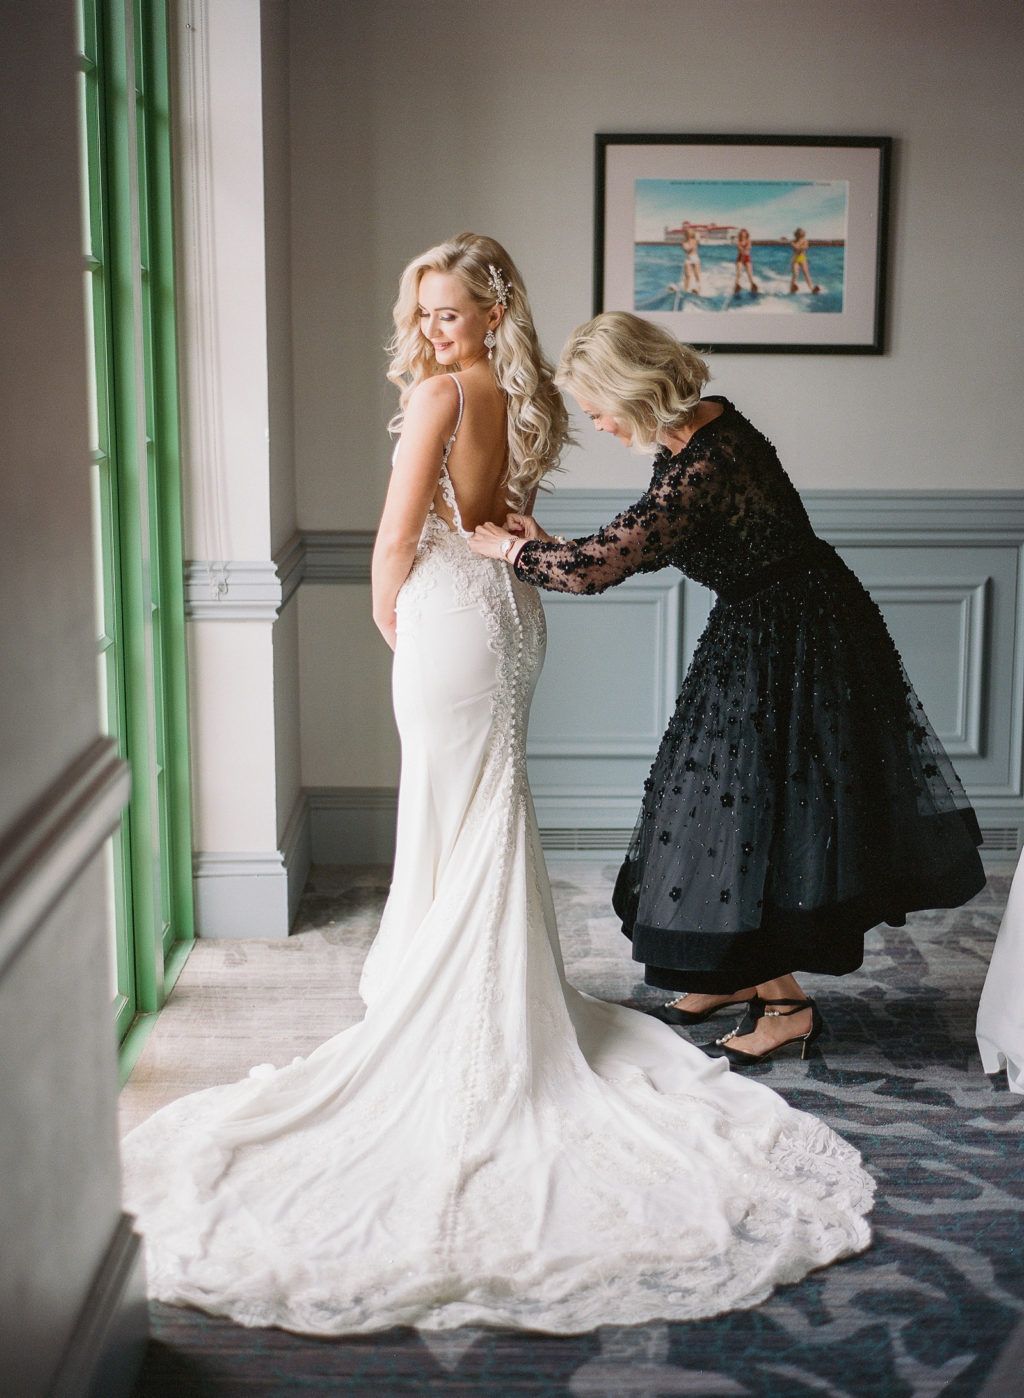 Tampa Bride Getting Wedding Ready with Mom in Open Back Wedding Dress | Tampa Bay Wedding Hair and Makeup Femme Akoi Beauty Studio